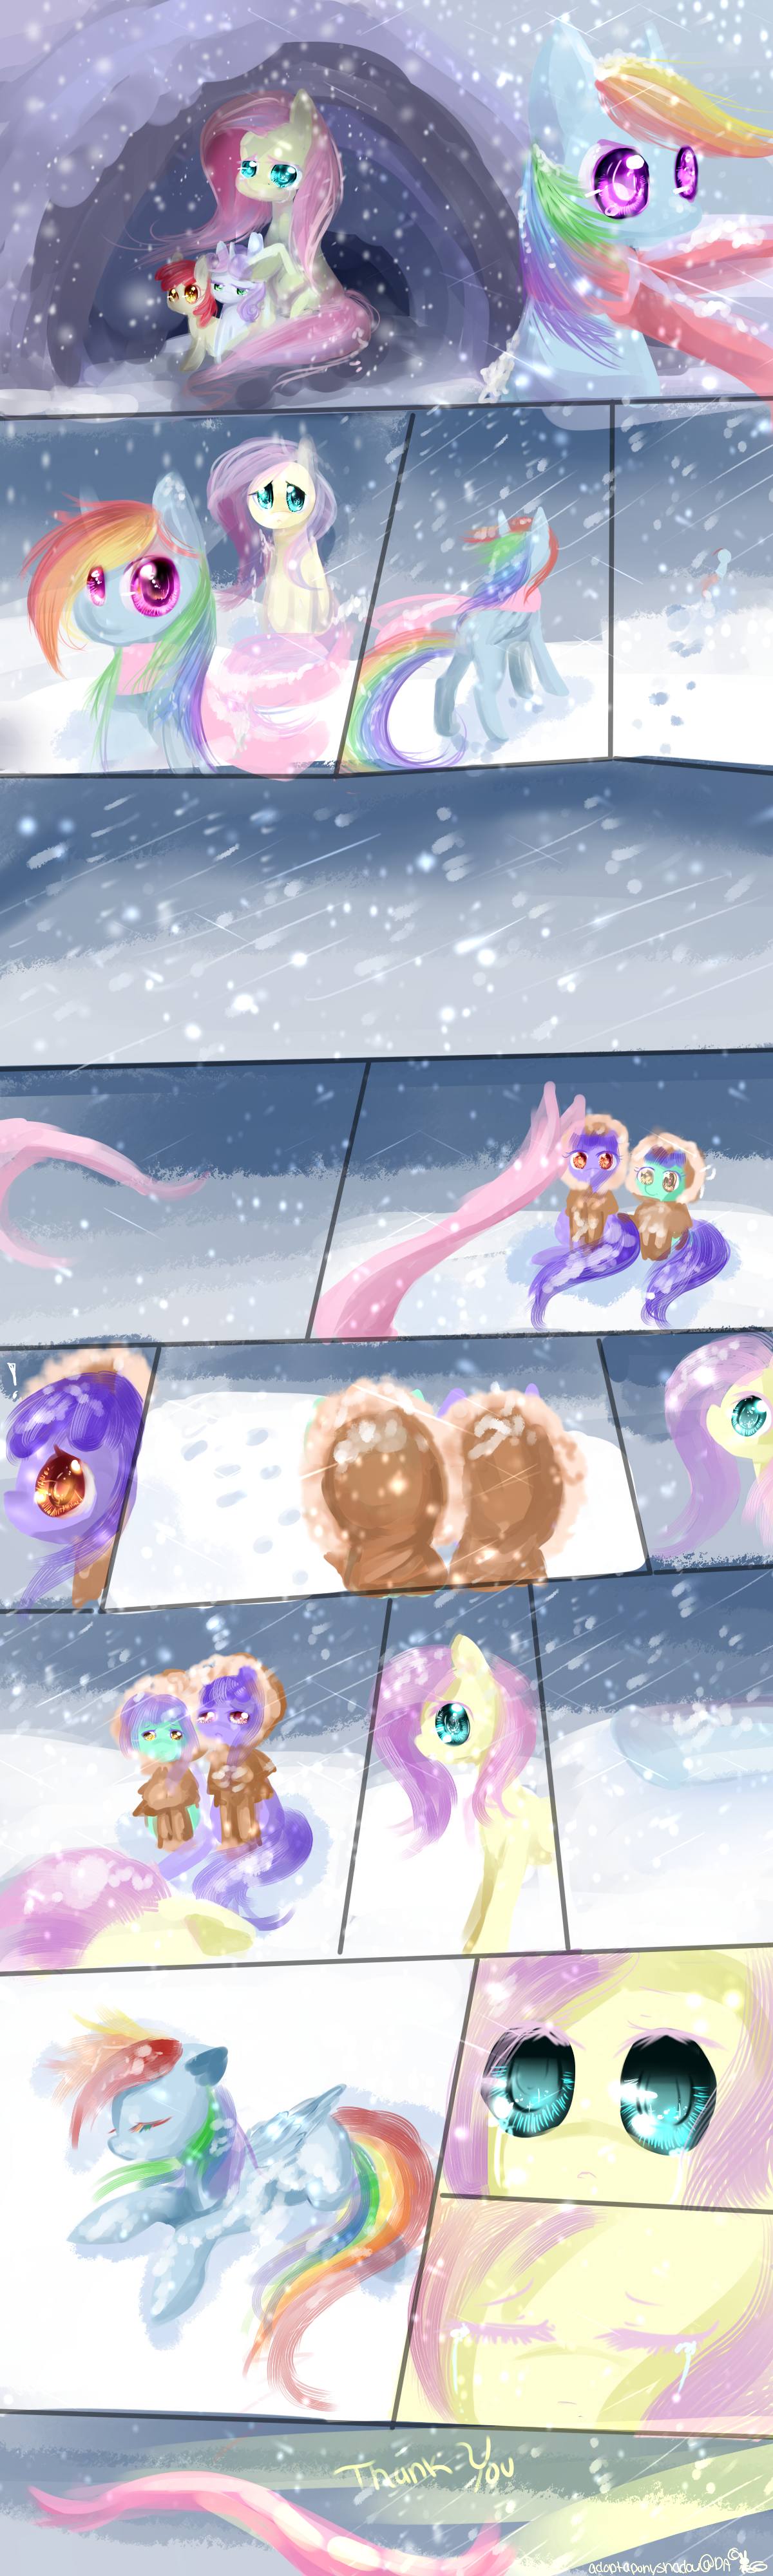 [Obrázek: the_scarf_mlp_comic_by_adoptaponyshadow-d6d0g9r.png]